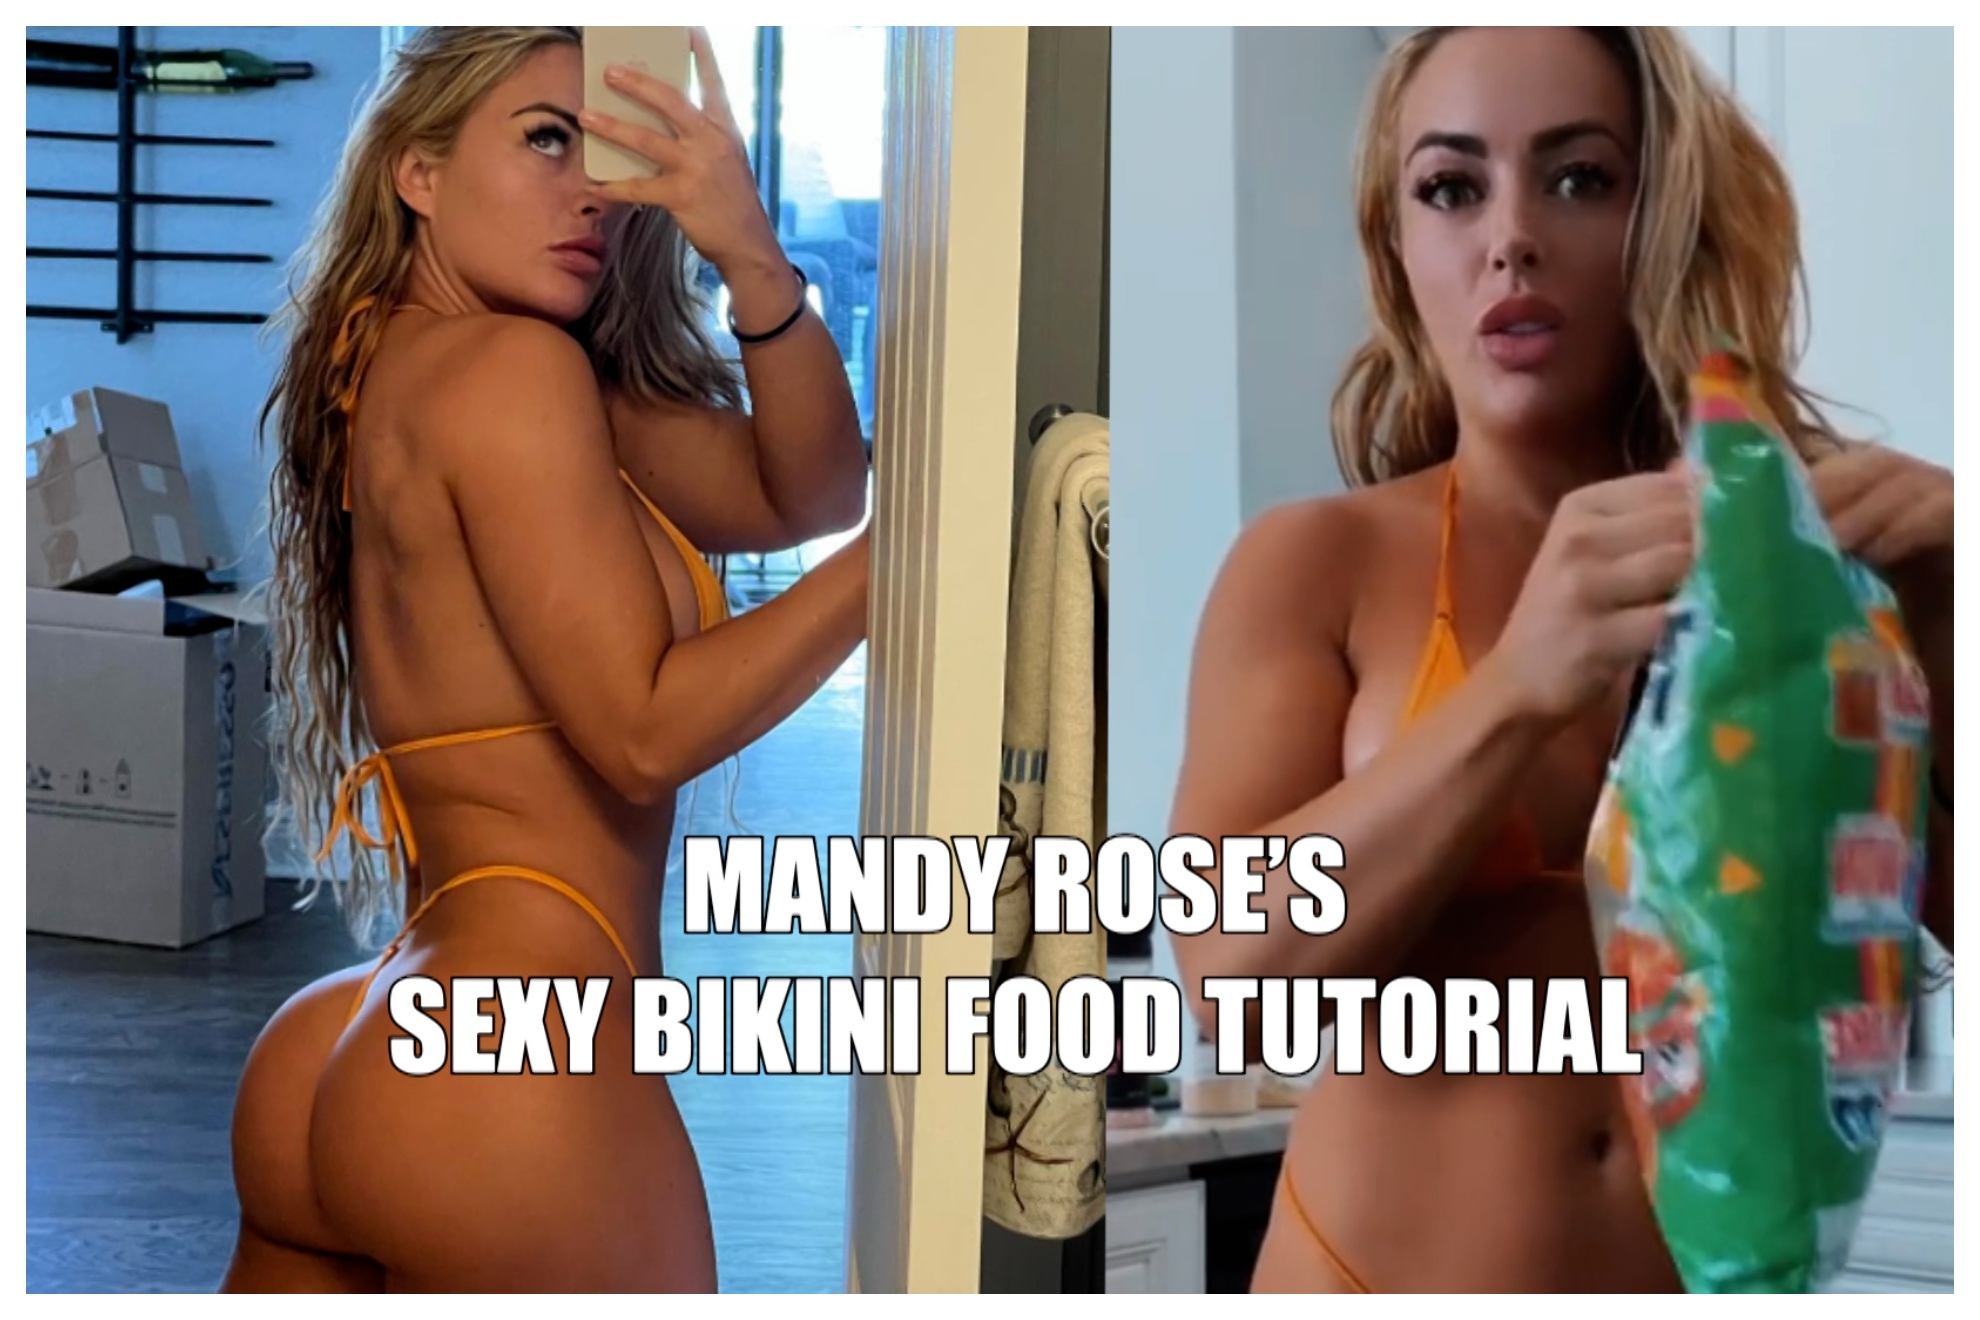 andrew halliwell recommends mandy rose xxx pic